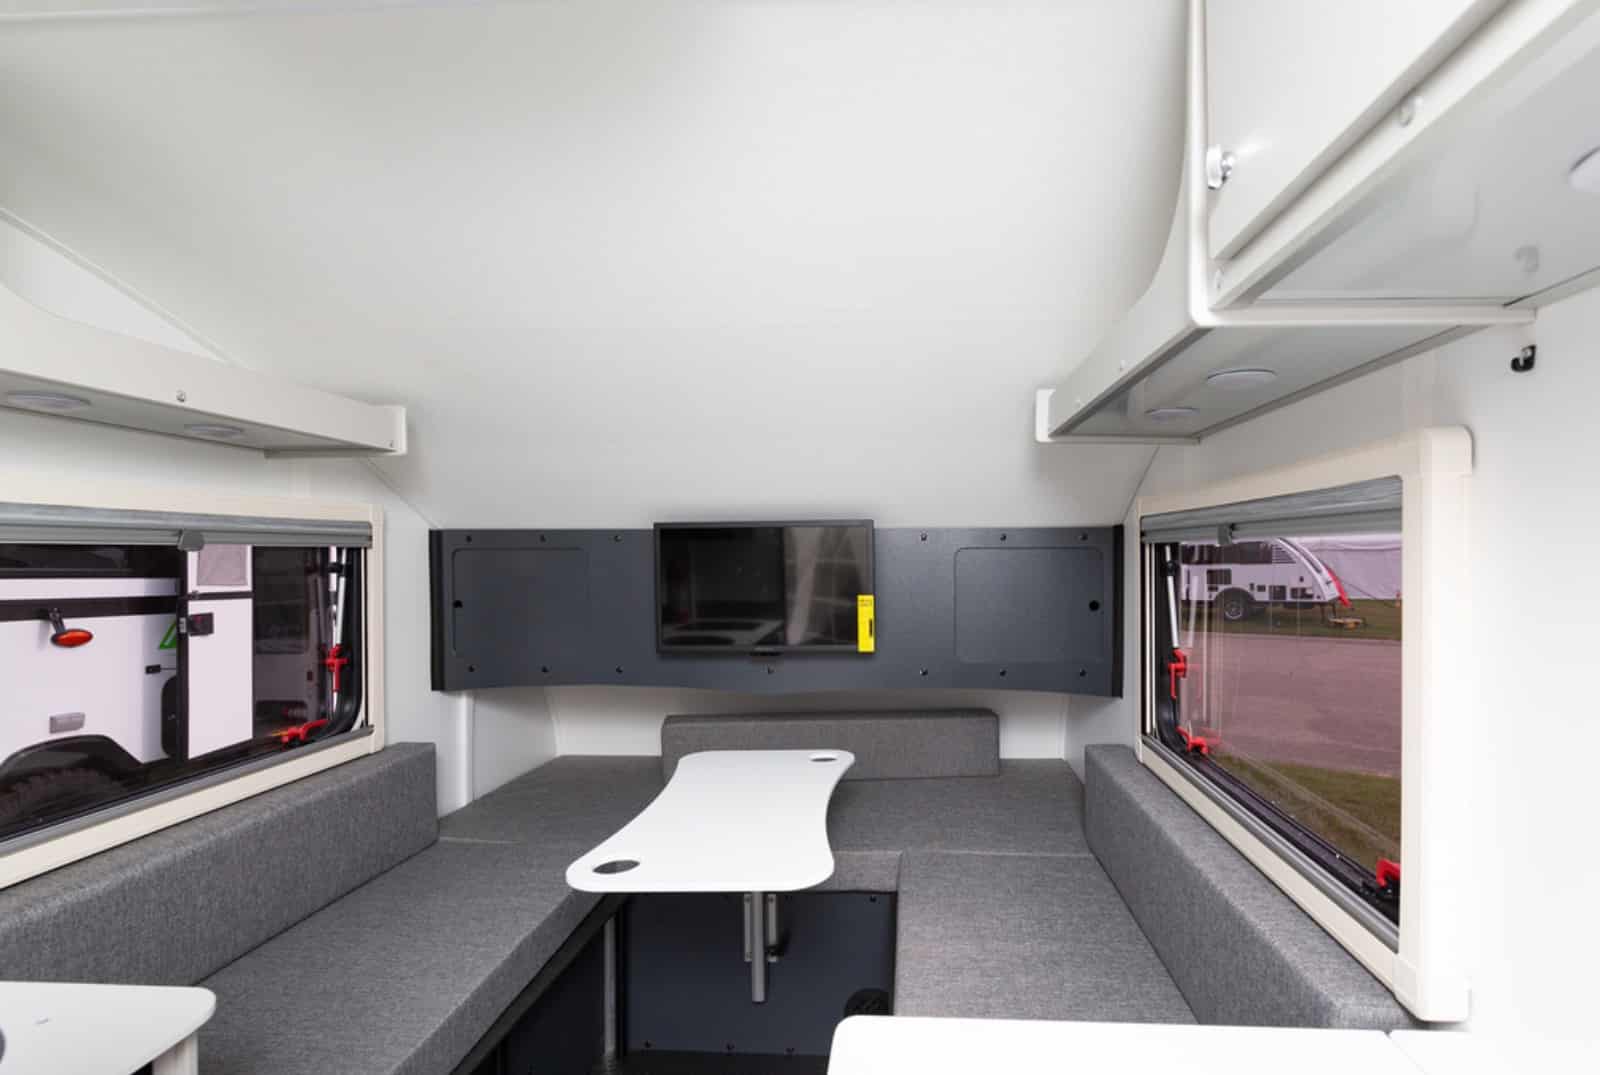 Interior of a modern camper van with bench seating and a central table, equipped with storage cabinets.